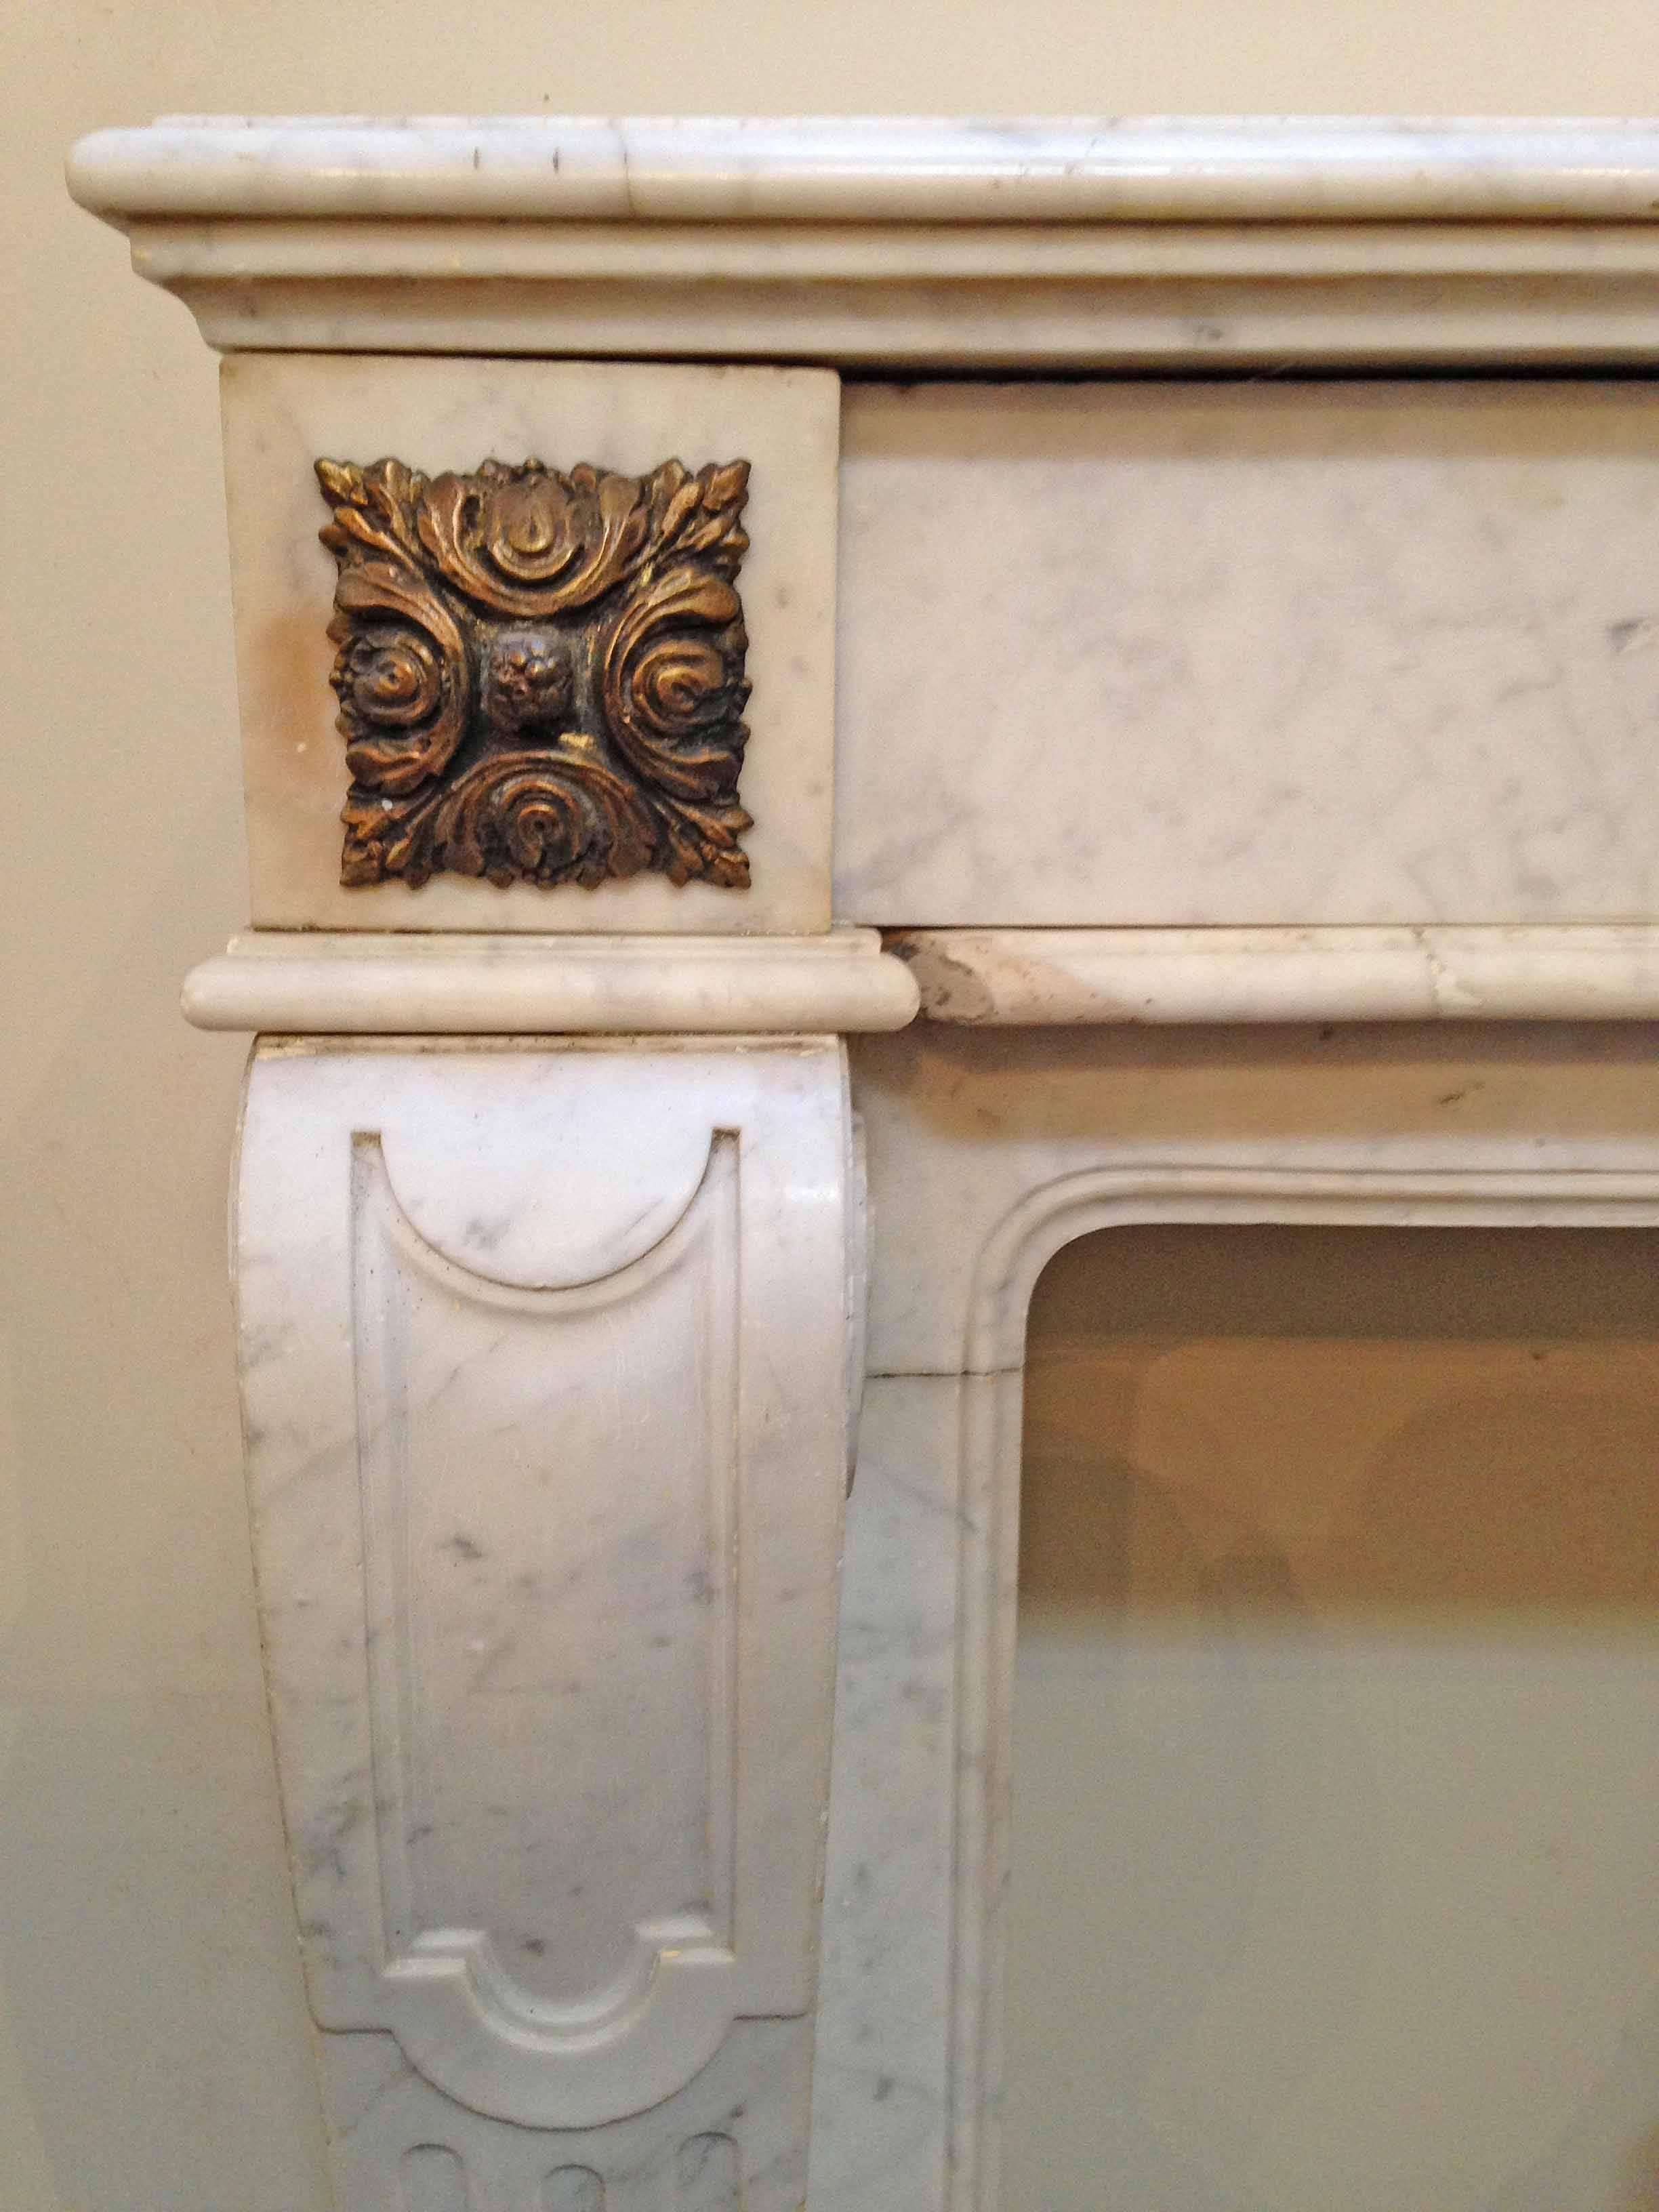 Made from Carrara marble, this lovely mantel showcases a copper medallion that appears to reflect two winged animals sipping from a fountain. On top of each leg sits a copper floral embellishment. The legs have revers fluting and a scroll-like curve